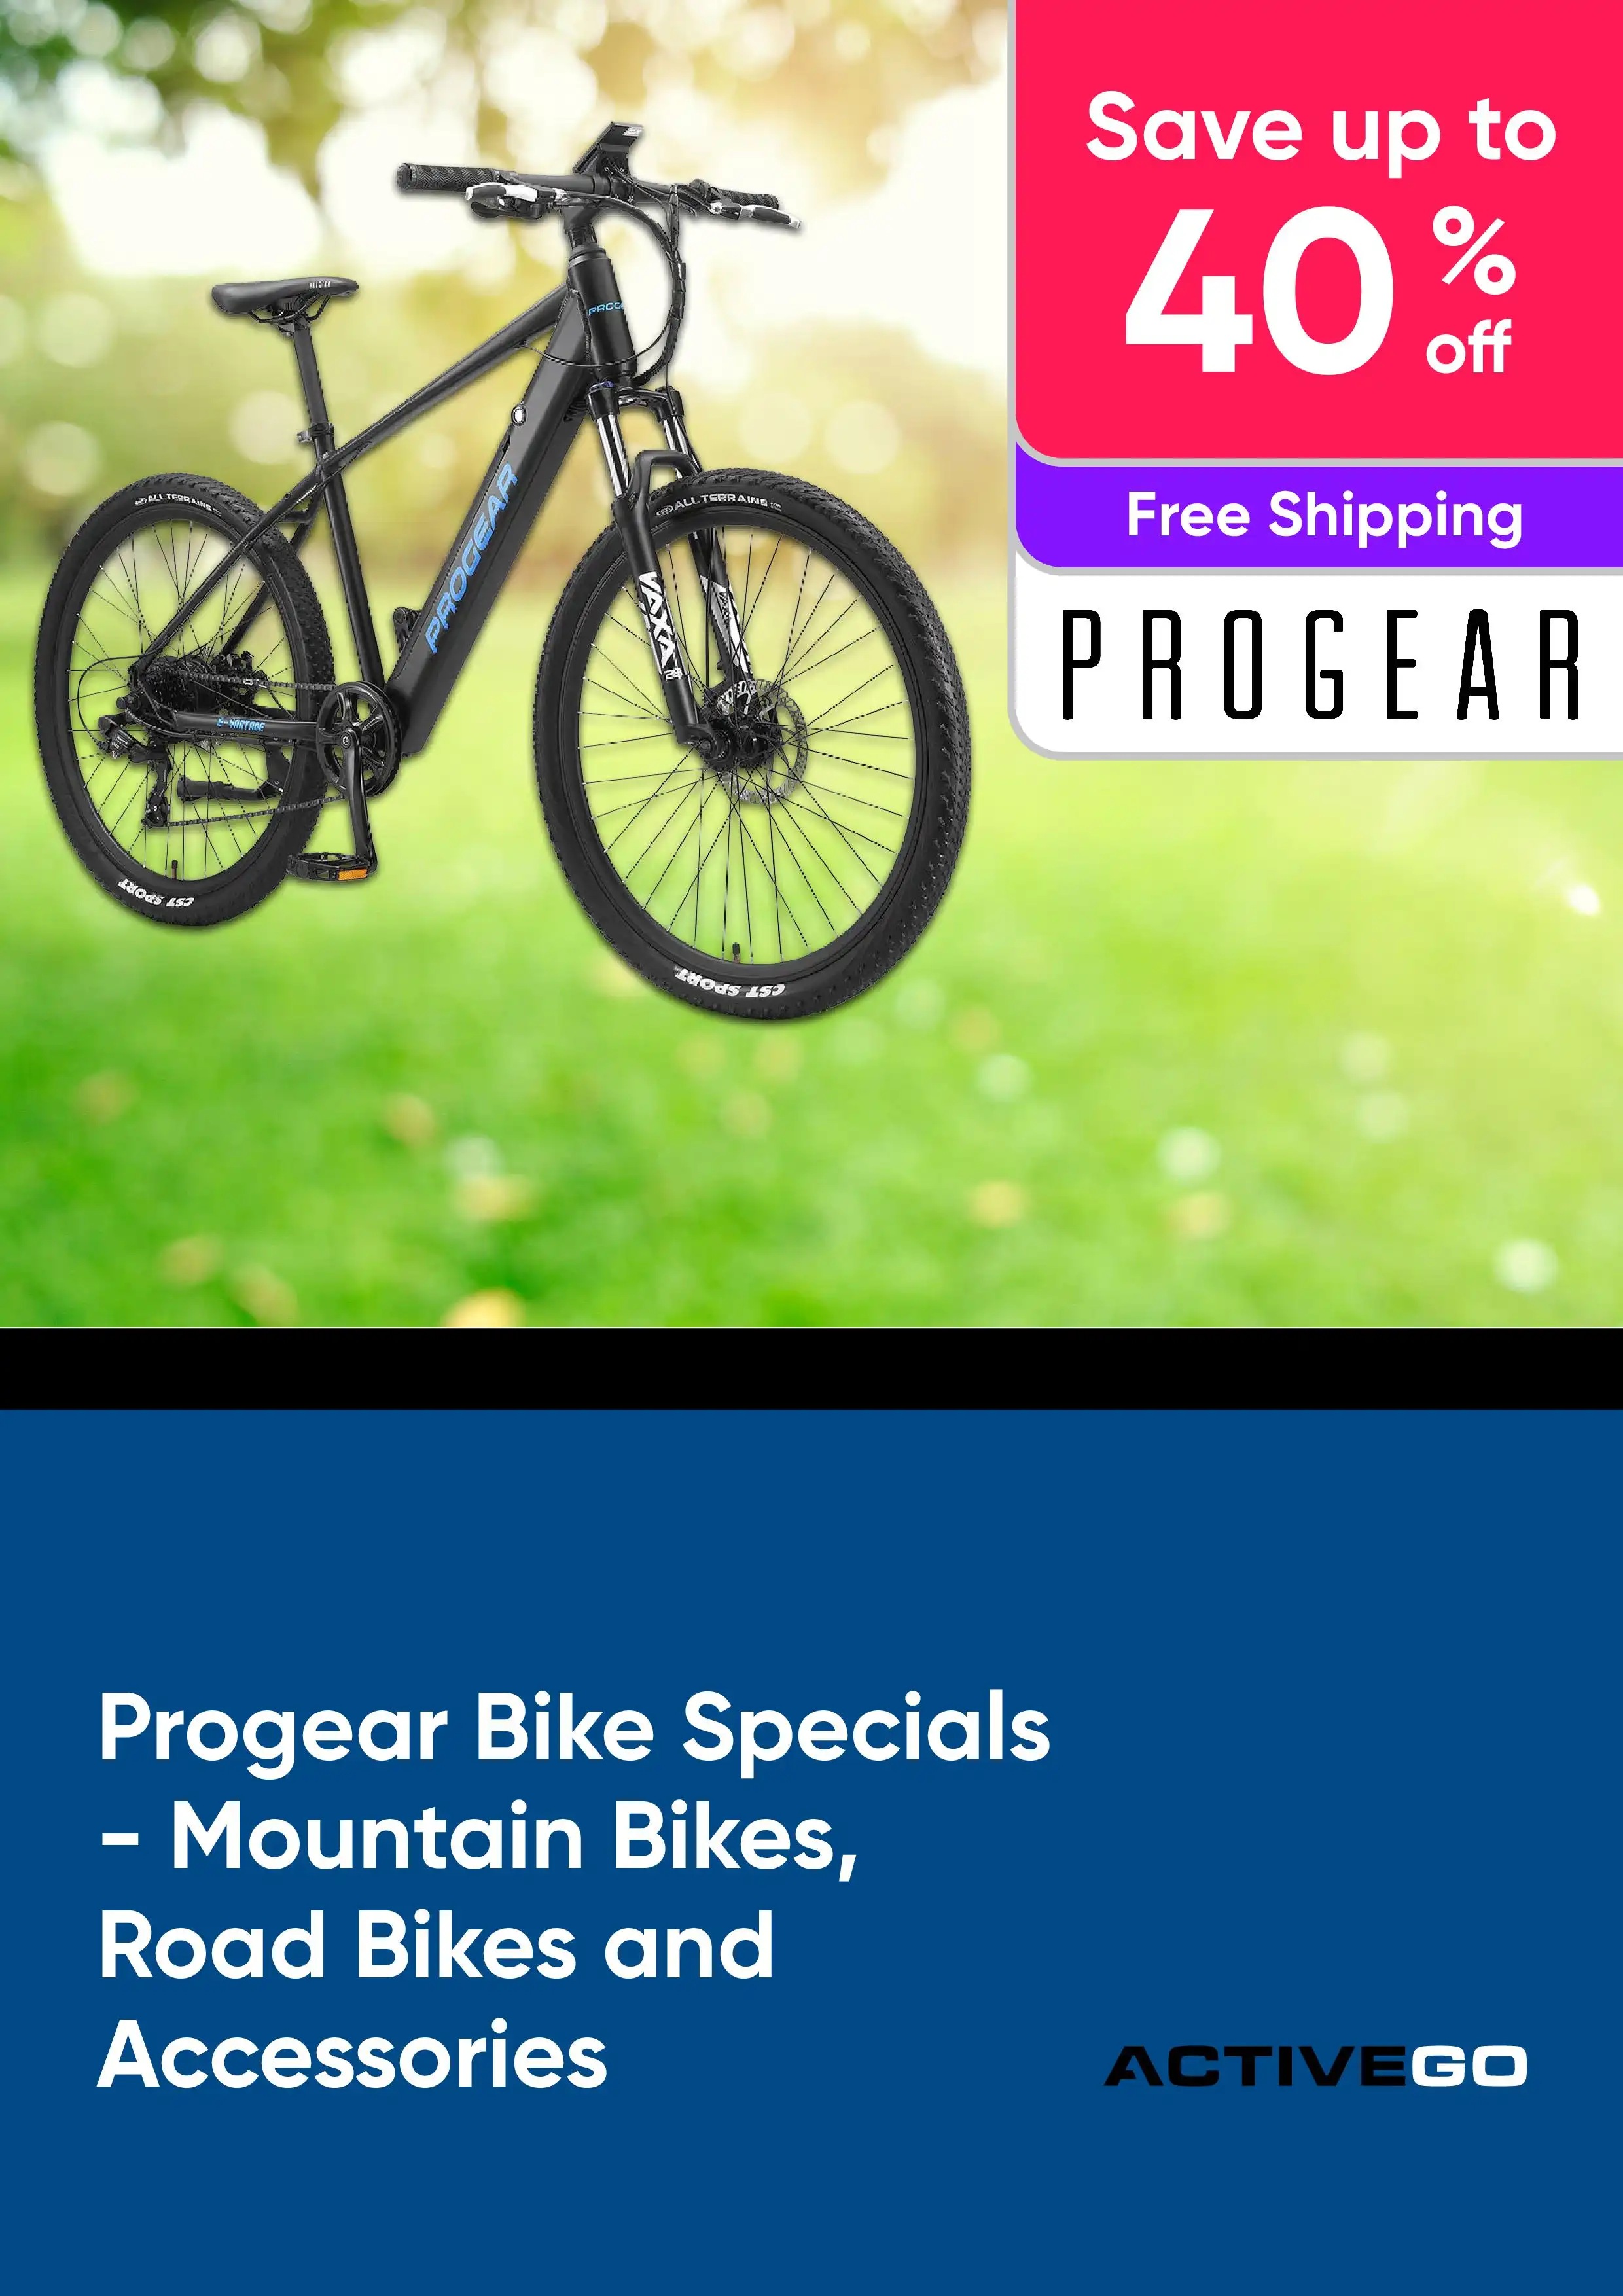 Progear Bike Specials - Mountain Bikes, Road Bikes and Accessories - Save up to 40% off